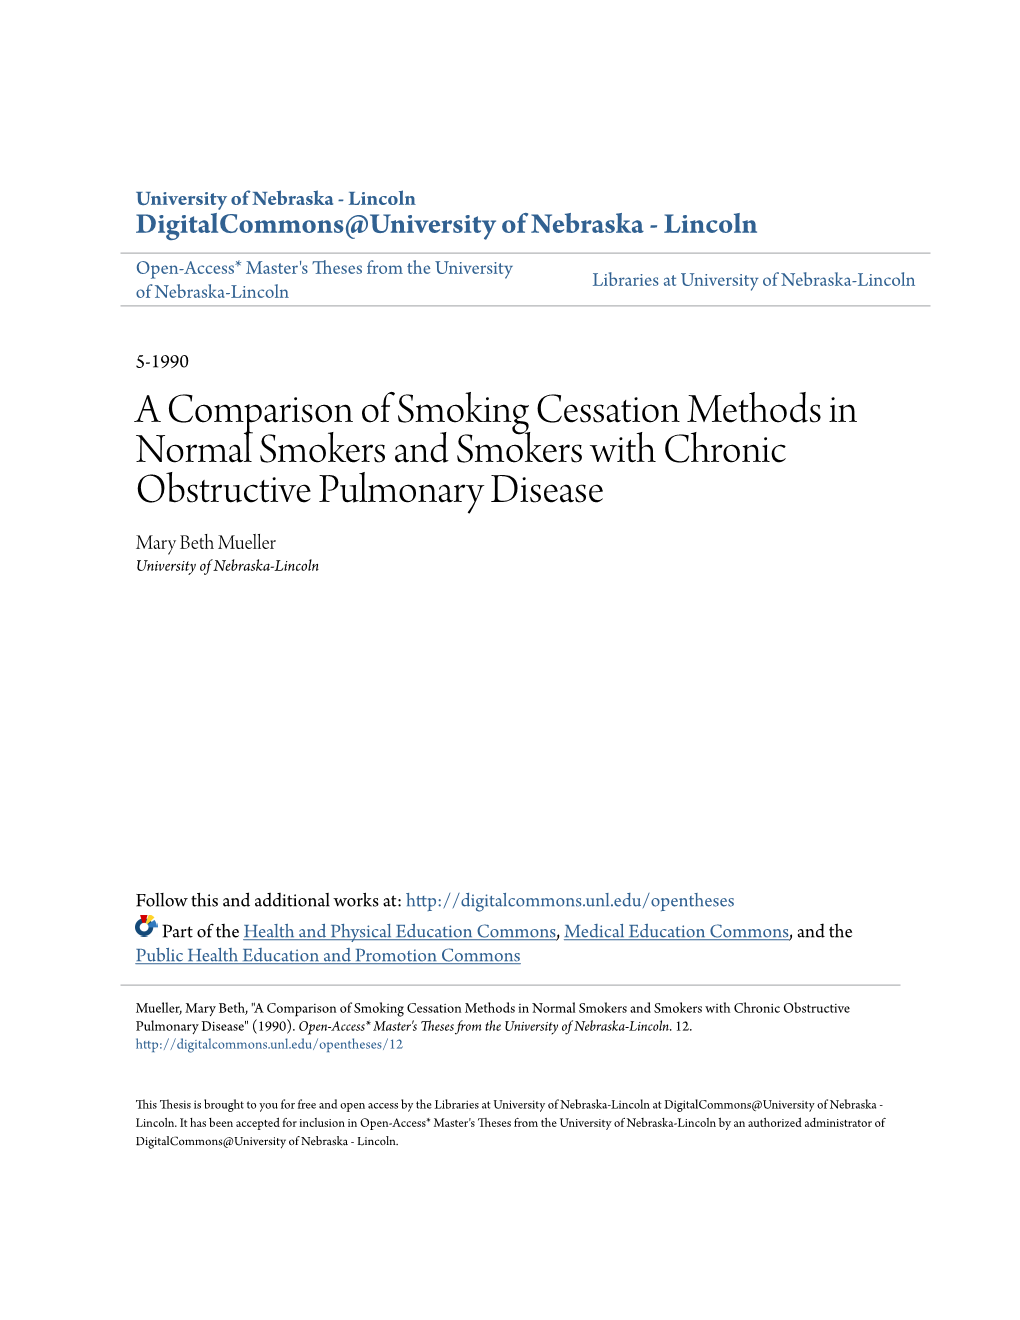 A Comparison of Smoking Cessation Methods in Normal Smokers and Smokers with Chronic Obstructive Pulmonary Disease Mary Beth Mueller University of Nebraska-Lincoln